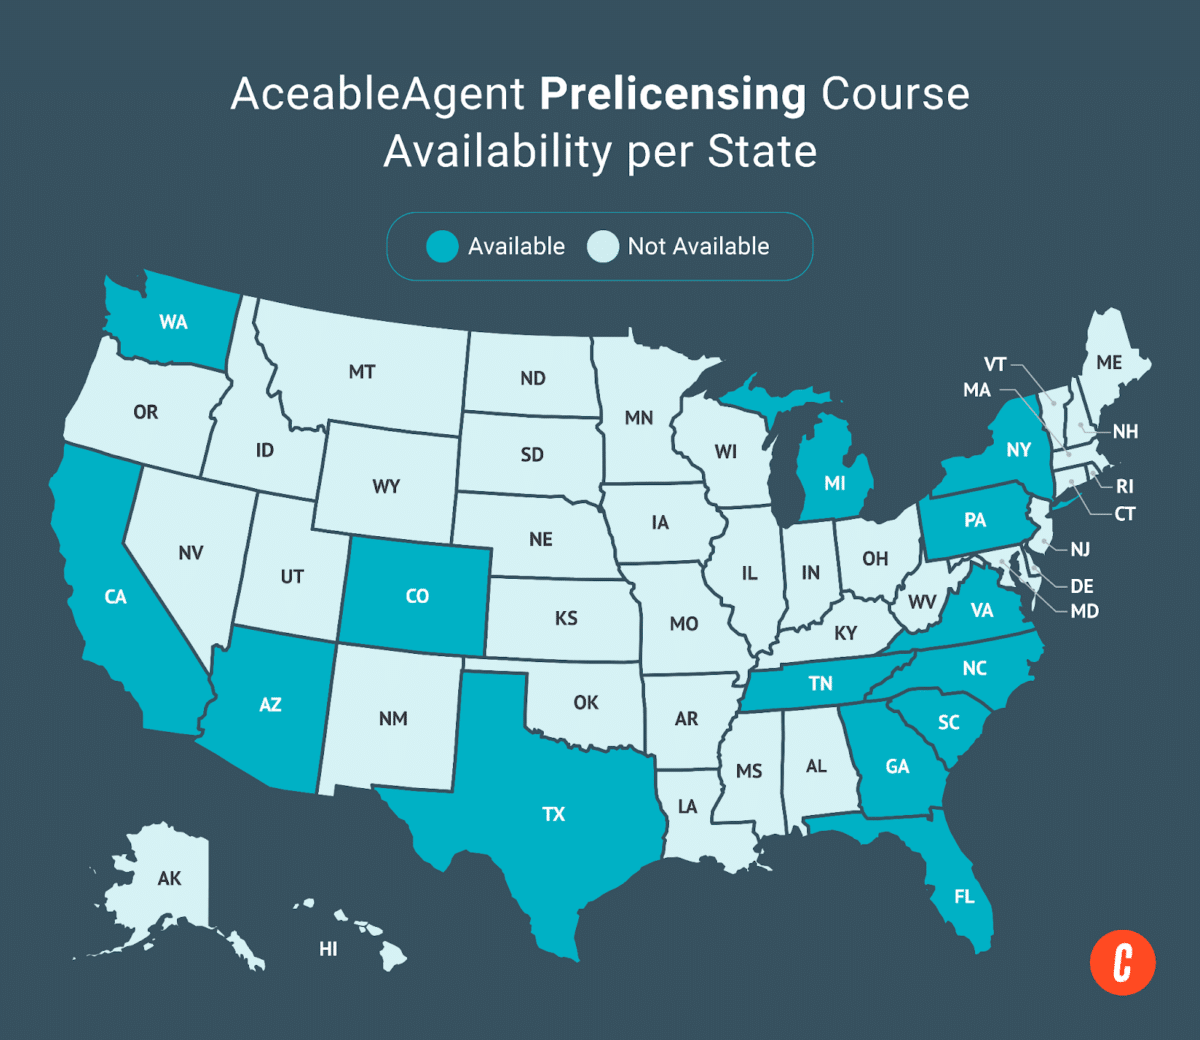 A U.S. map with states where AceableAgent's available prelicensing courses are shaded